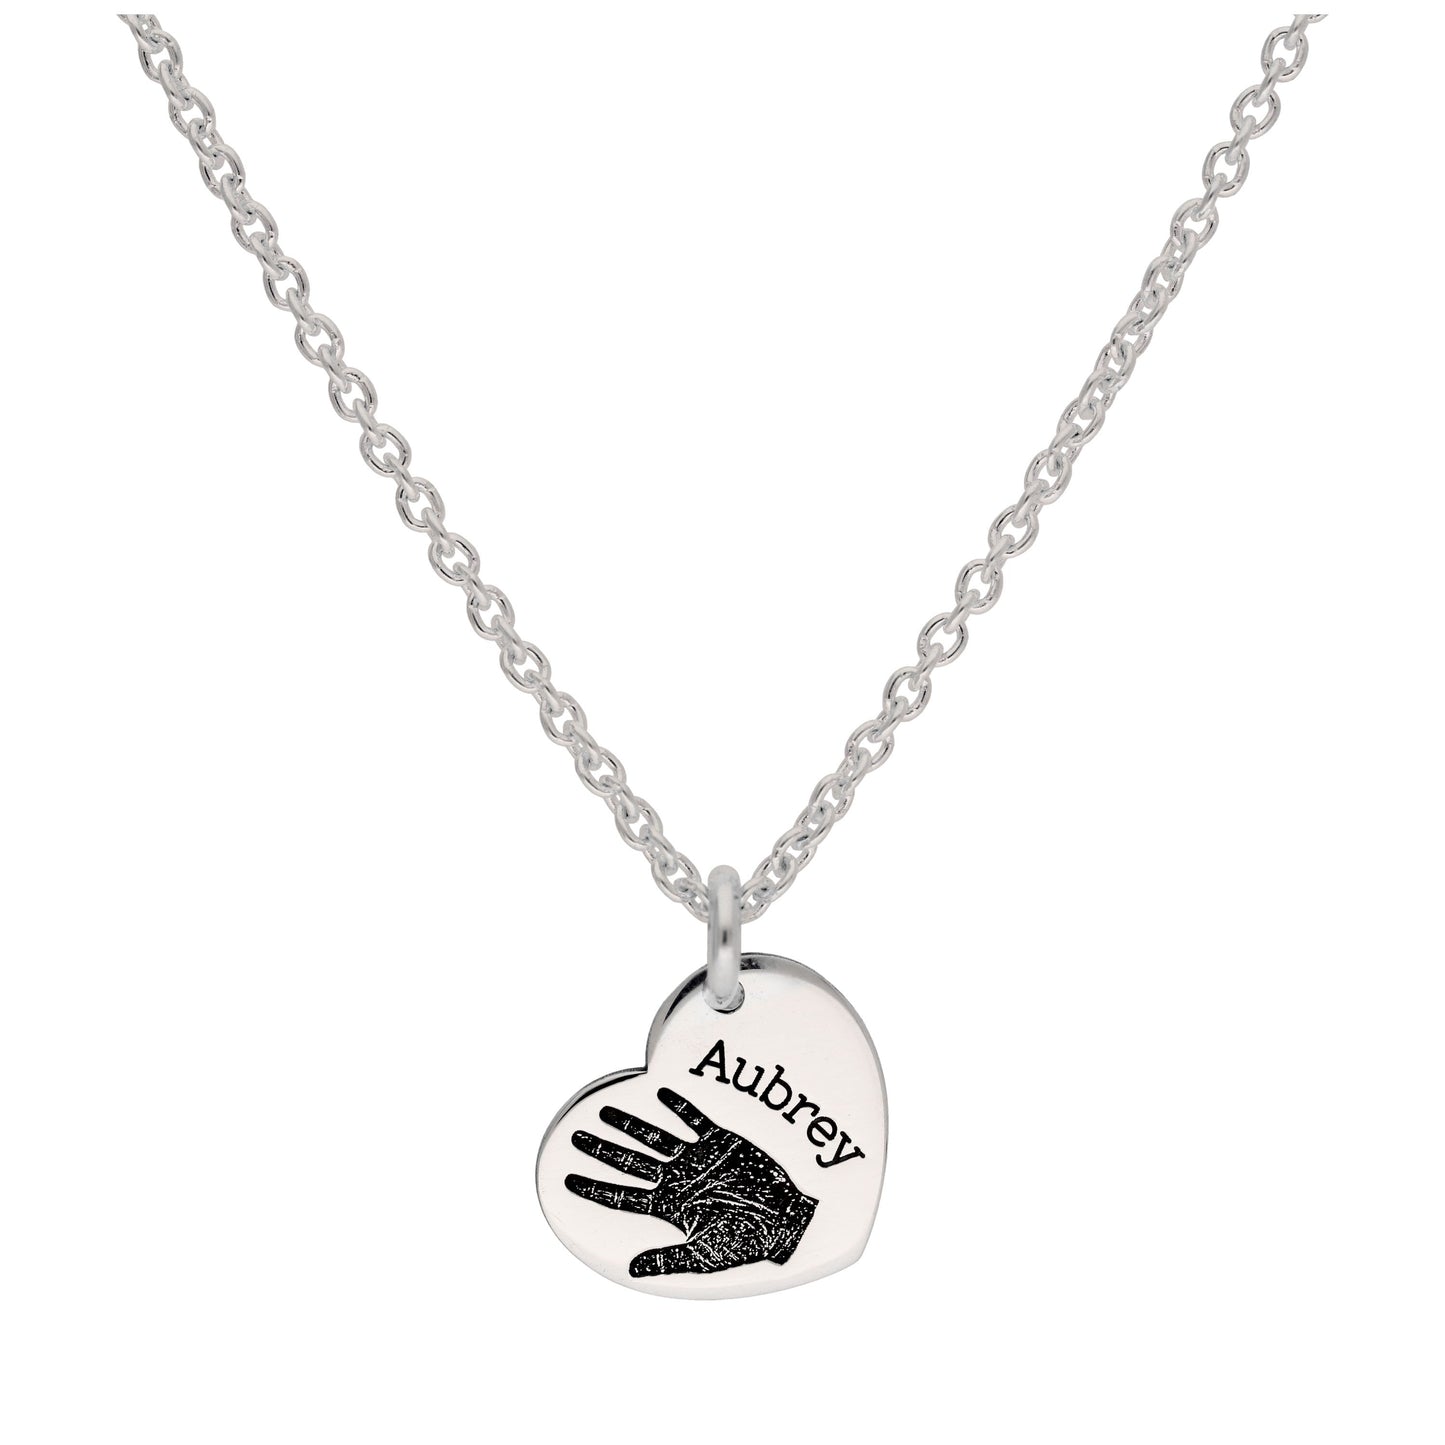 Bespoke Sterling Silver Handprint Heart Name Necklace 16 - 24 Inches